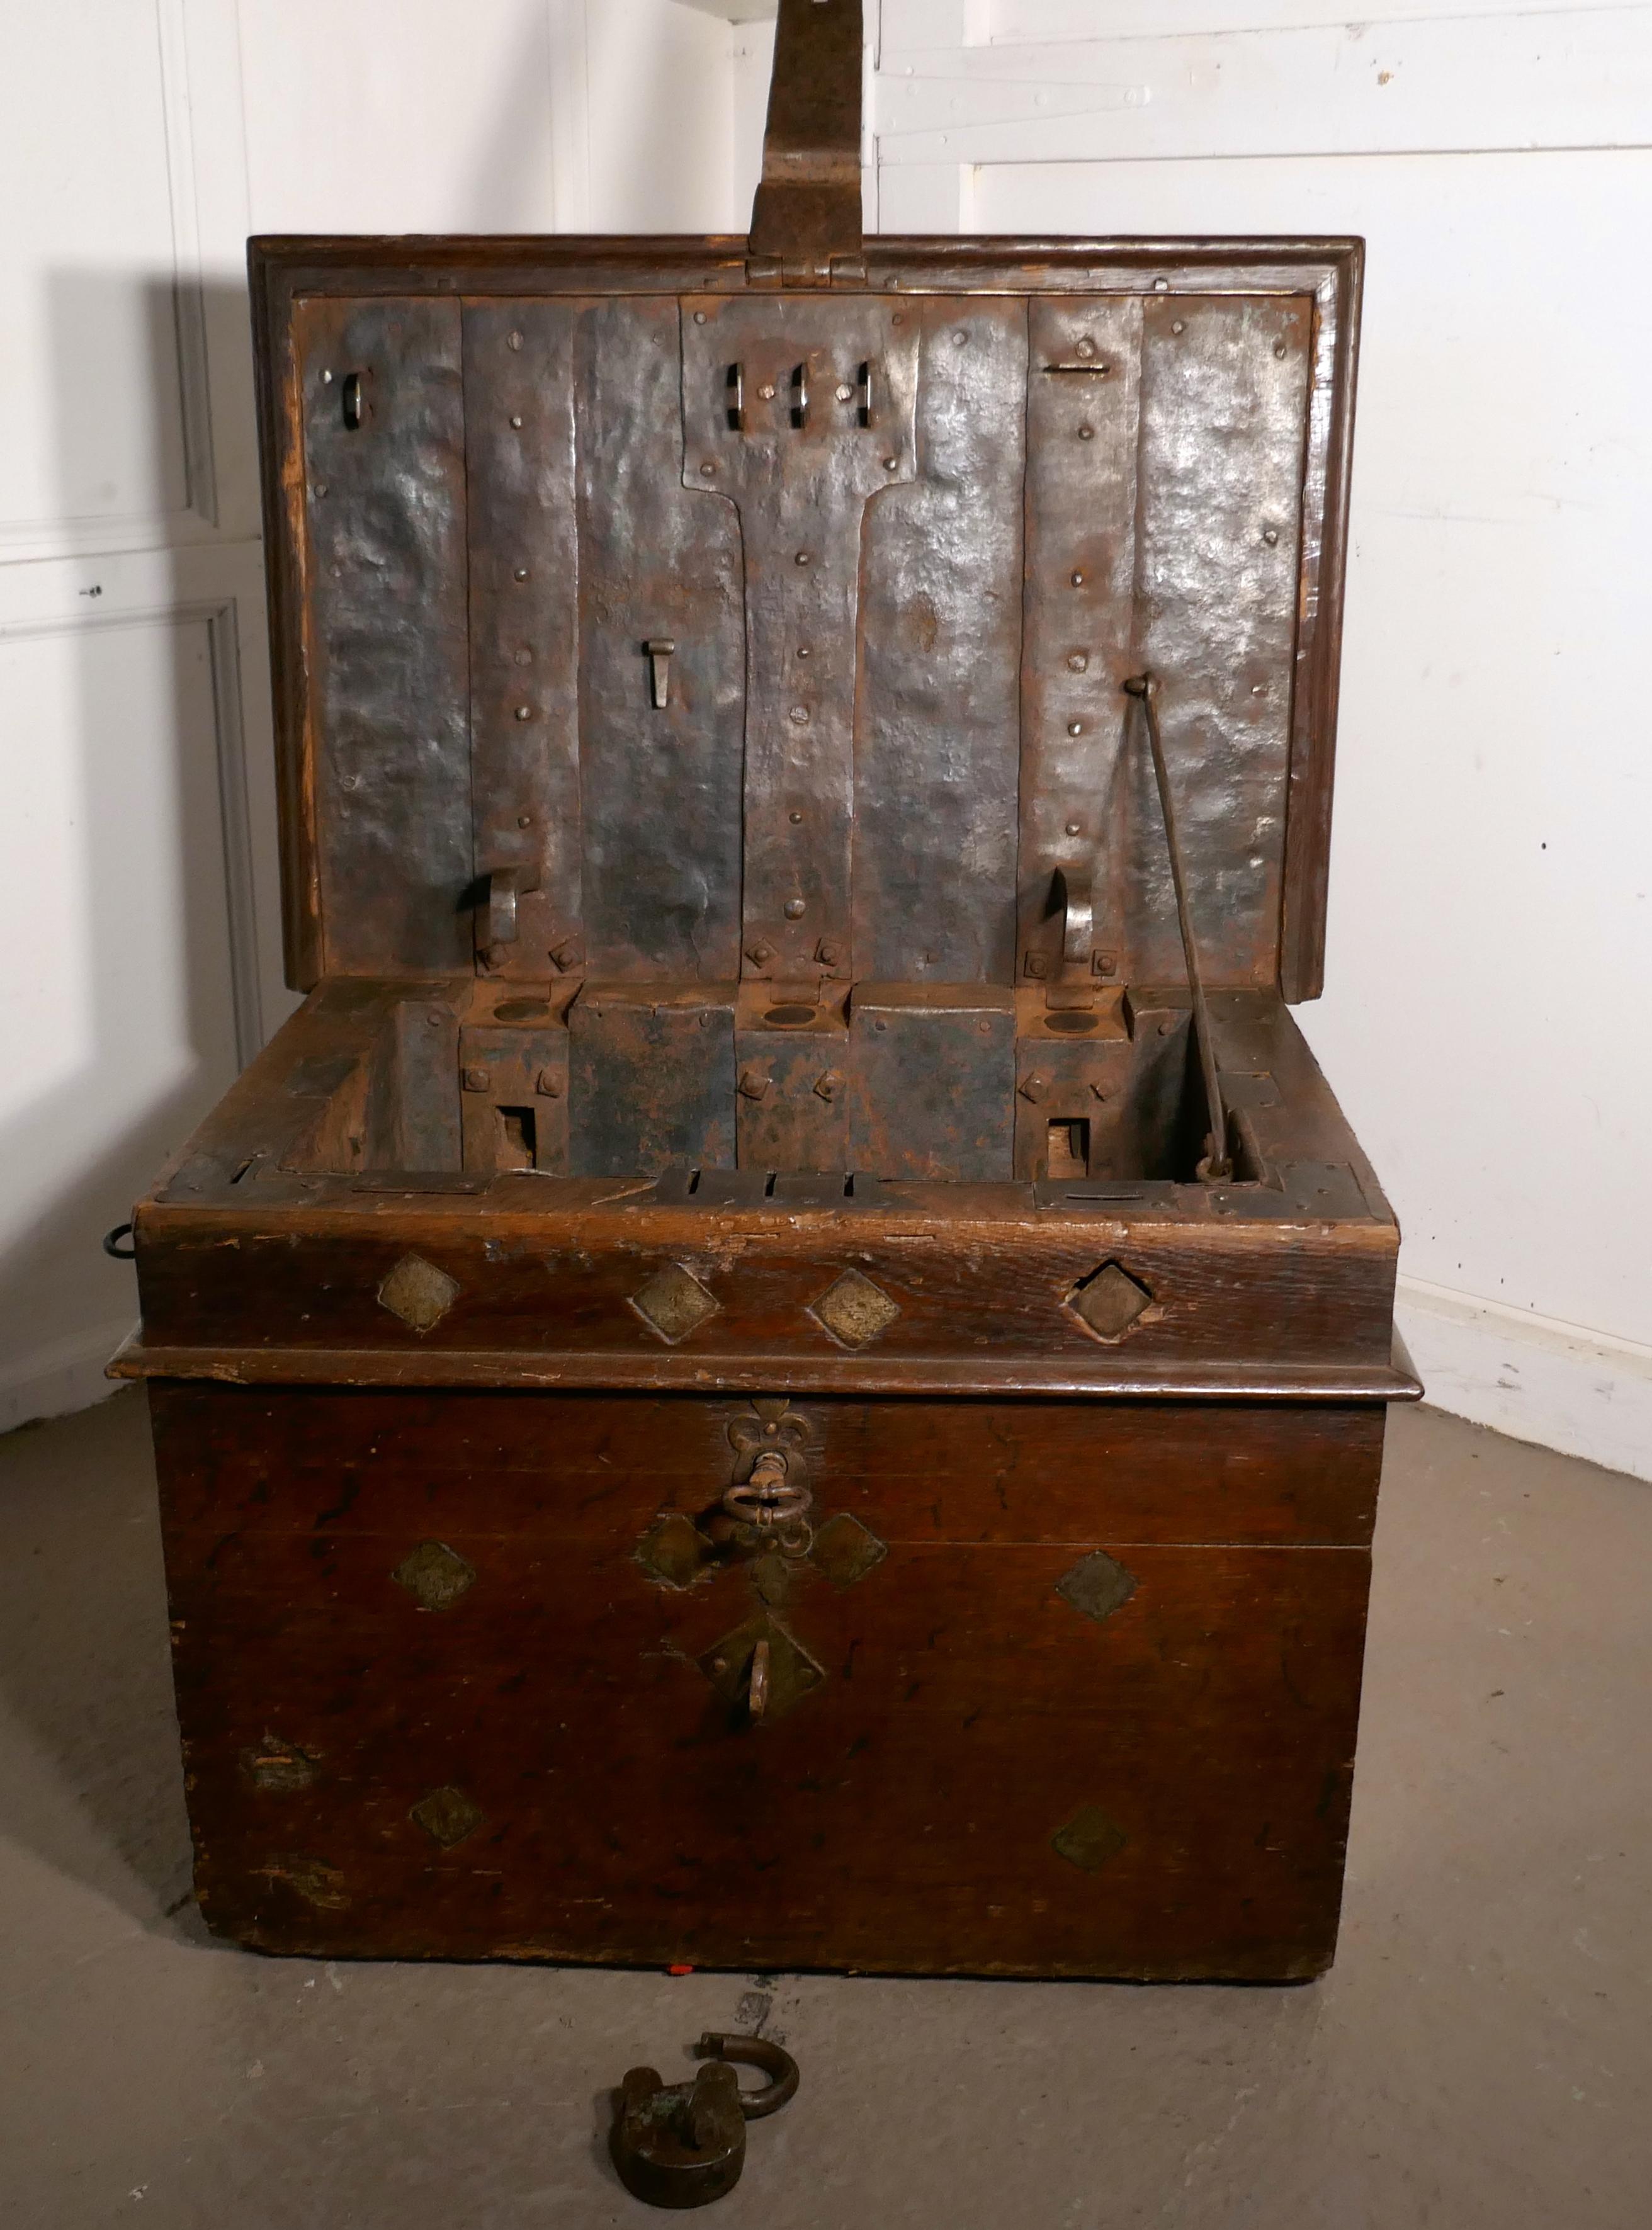 17th century French coffer, oak silver treasure chest, strong box

A very rare piece, this oak Coffer was made in the 16th century in 3” thick Oak, lined inside and strengthened through the wood with 1” square Iron Rods.
Needless to say the chest is